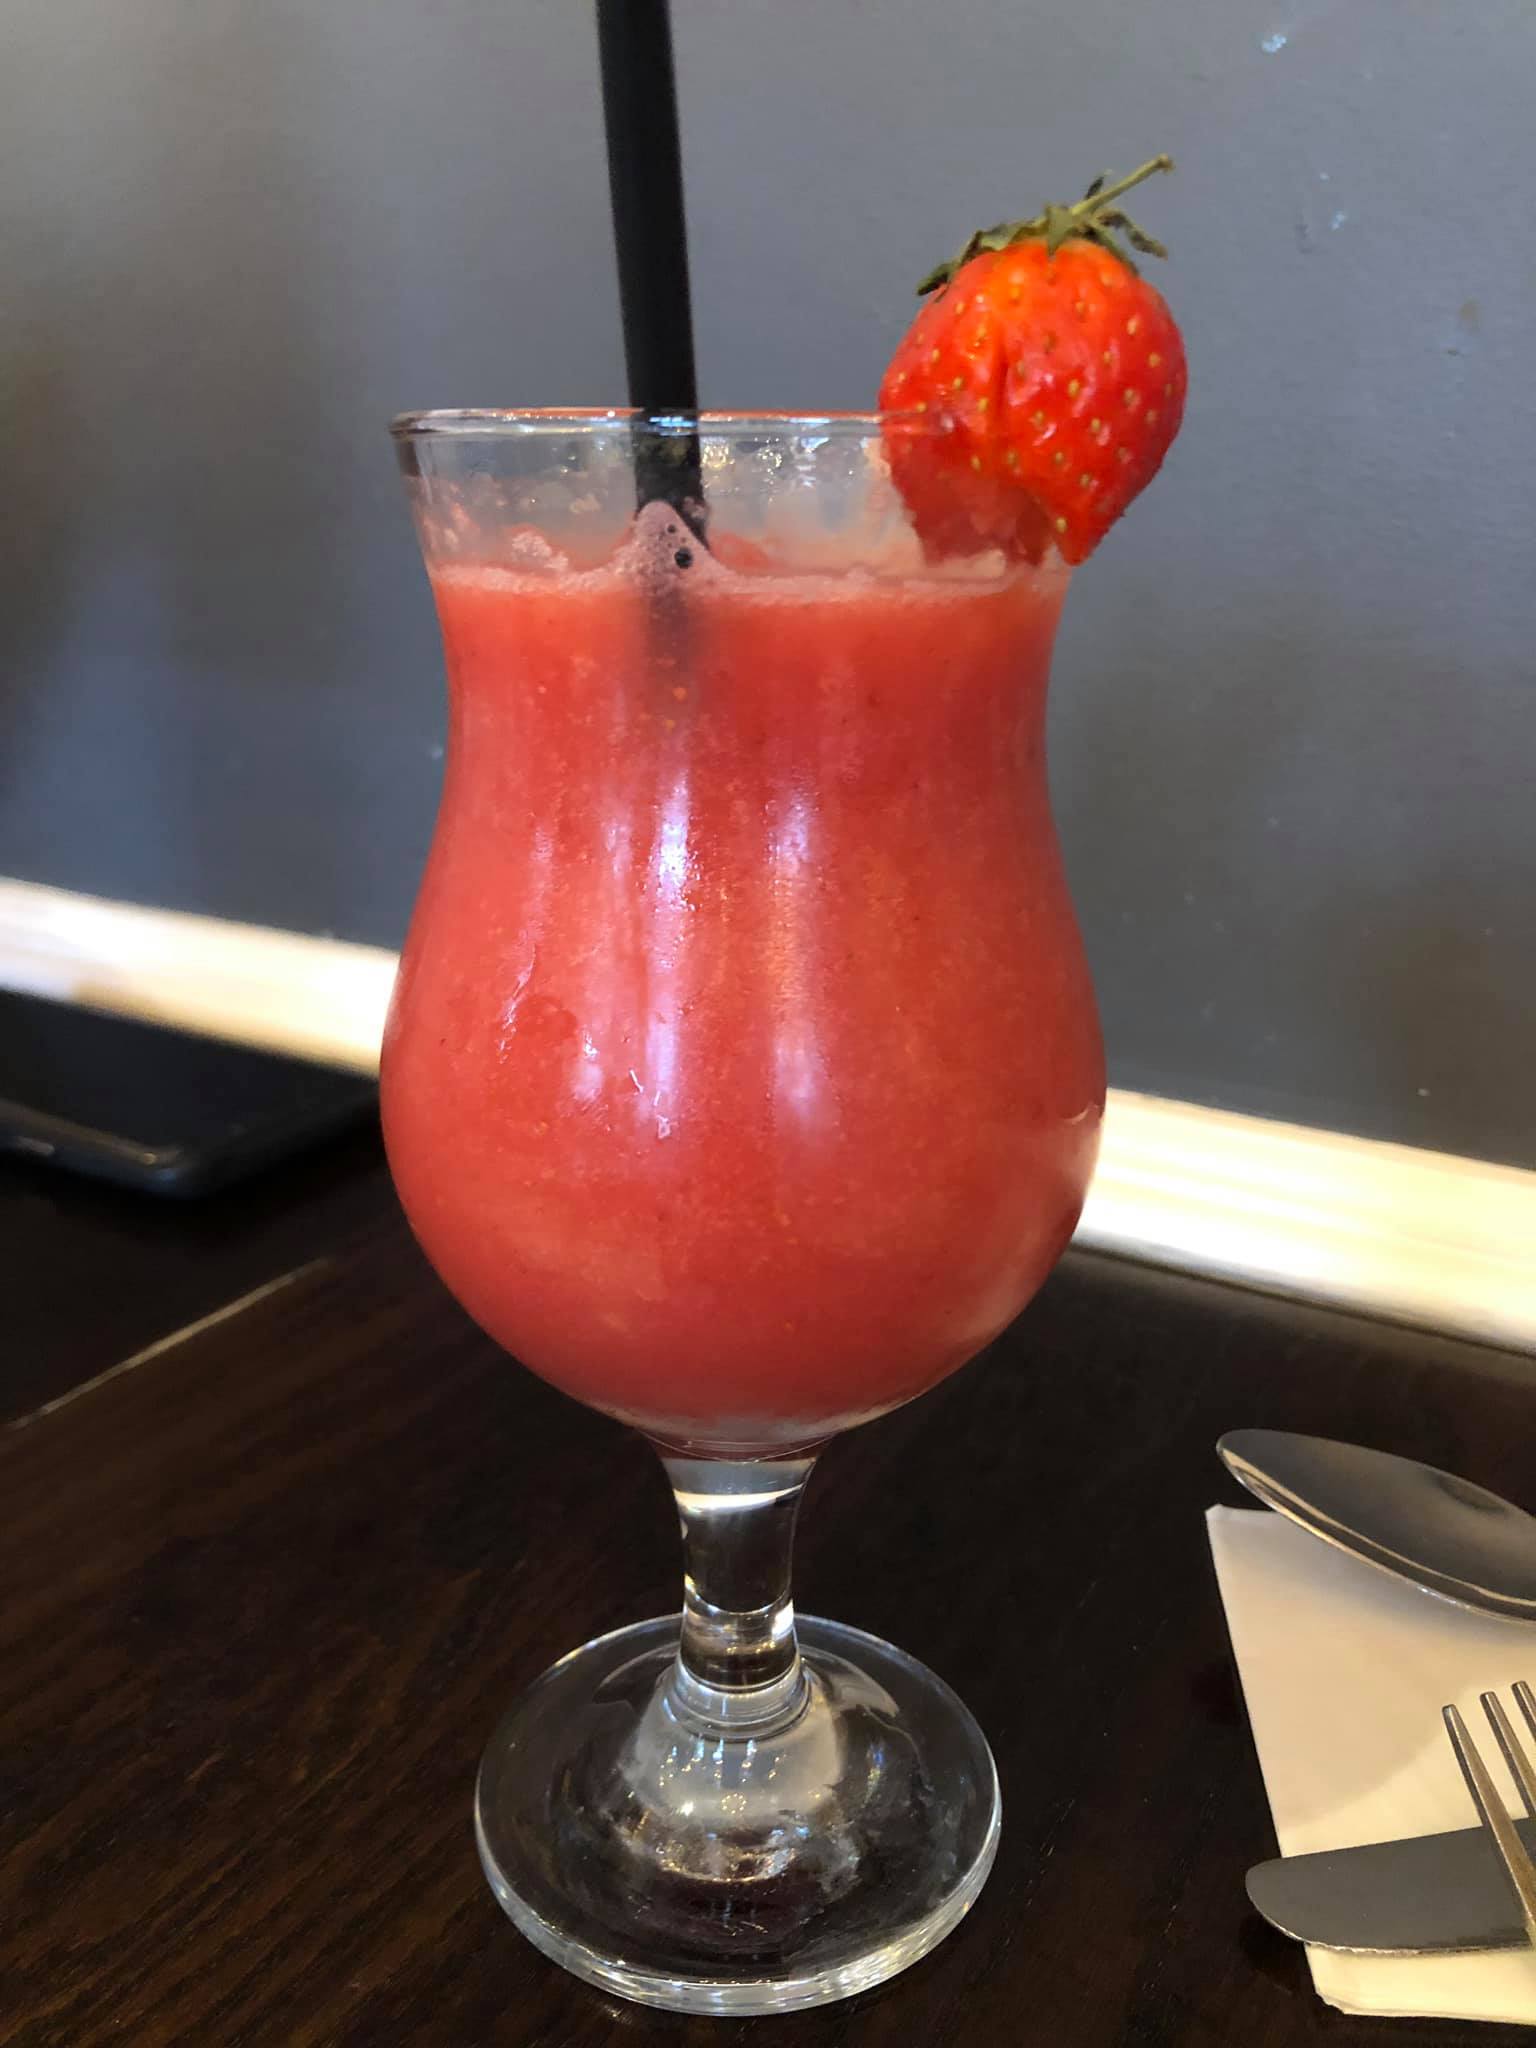 Strawbery Juice in a glass decorated with strawberry on the glass